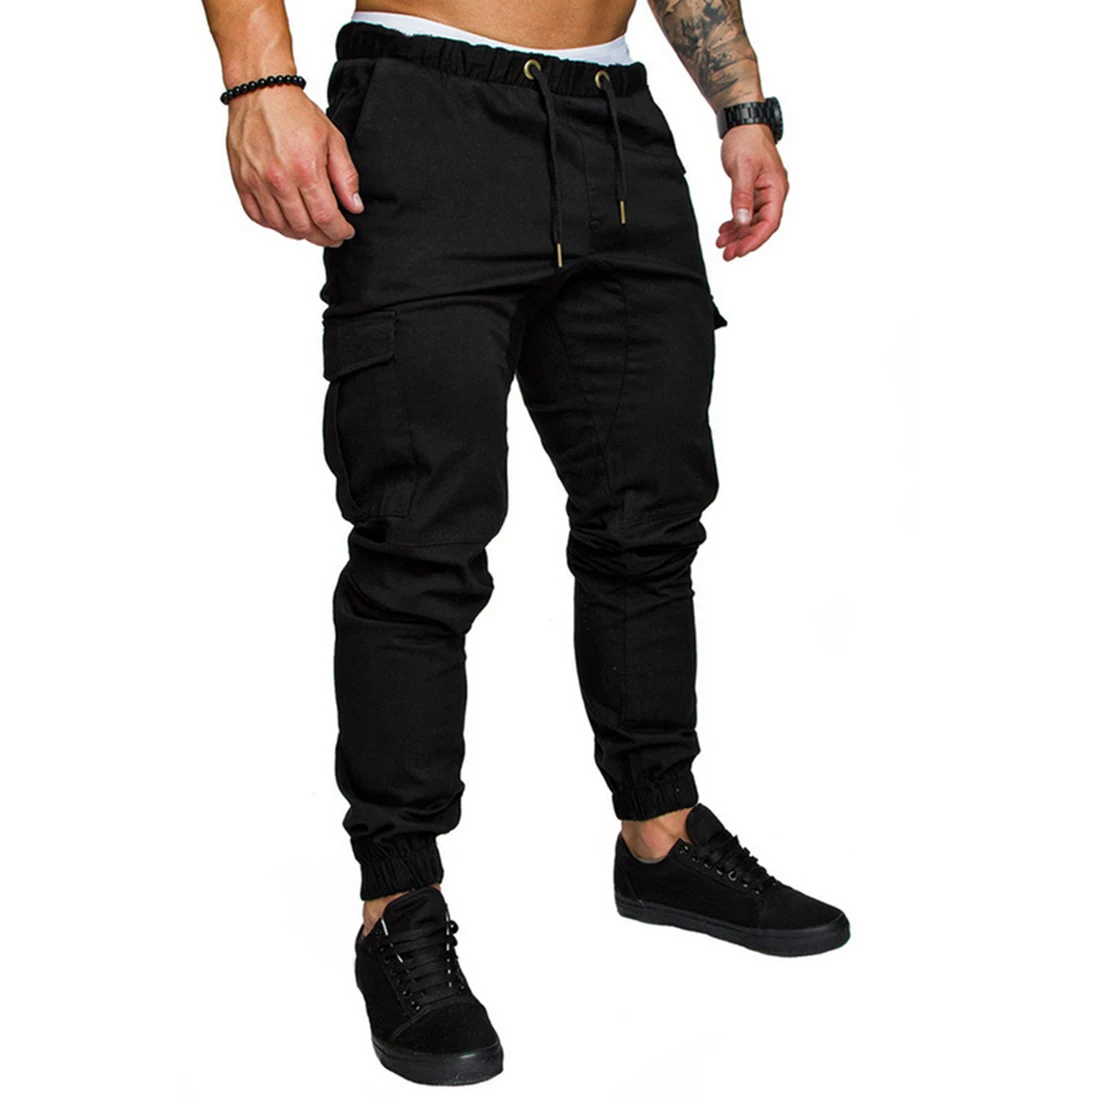 

SHUJIN New Men's Casual Slim Fit Tracksuit Sports Cargo Pants Fitness Bottoms Gym Skinny Joggers Sweat Trousers M-2XL